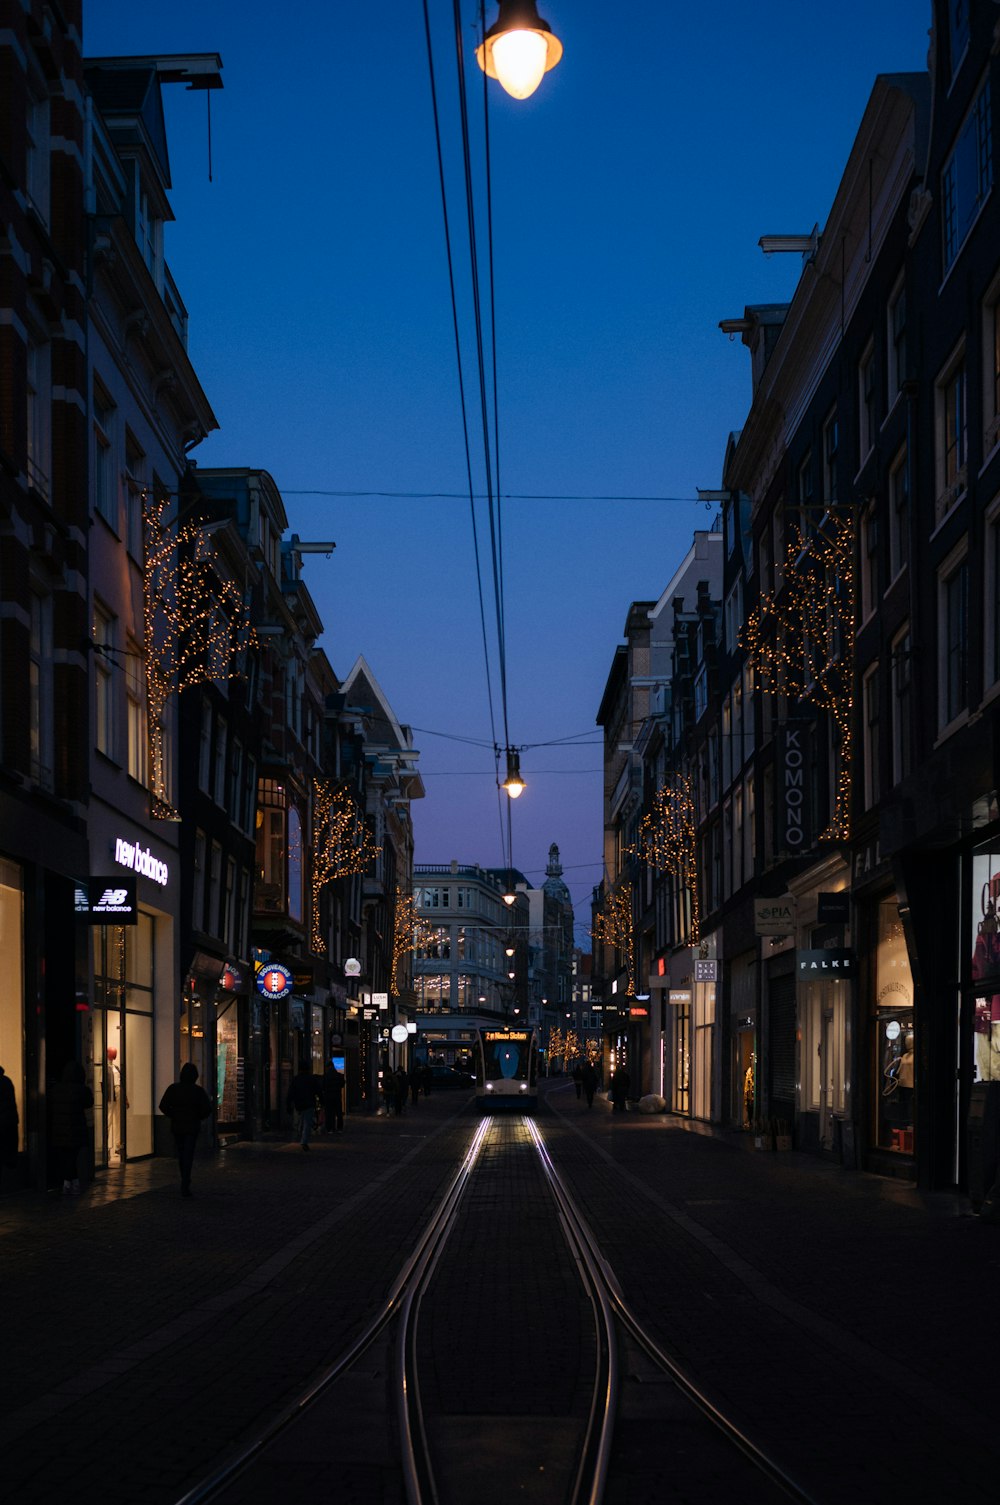 a city street at night with a train on the tracks